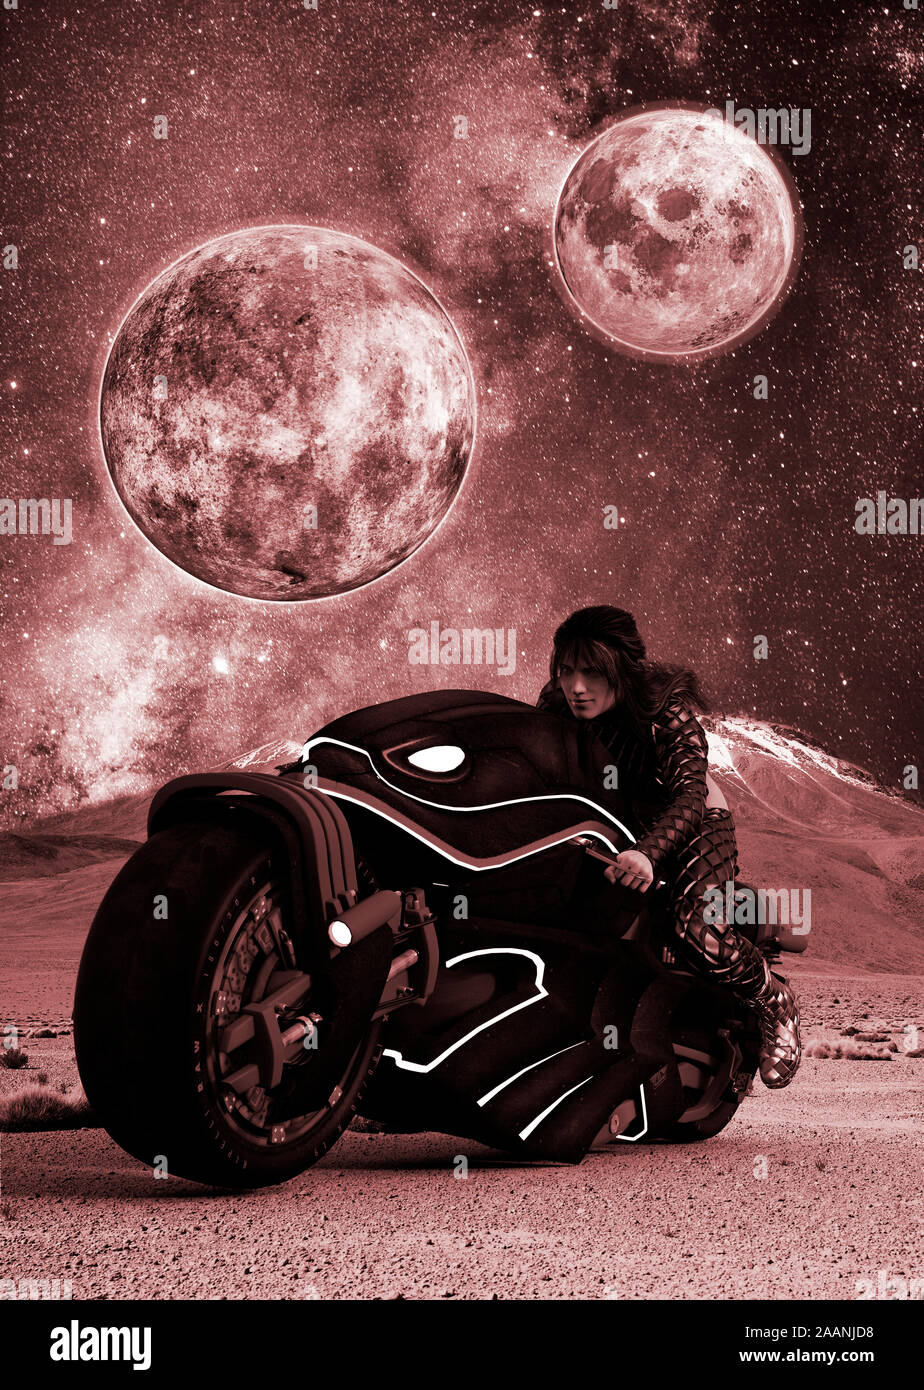 Girl on motorcycle. Abstract alien background. Red planet illustration Stock Photo